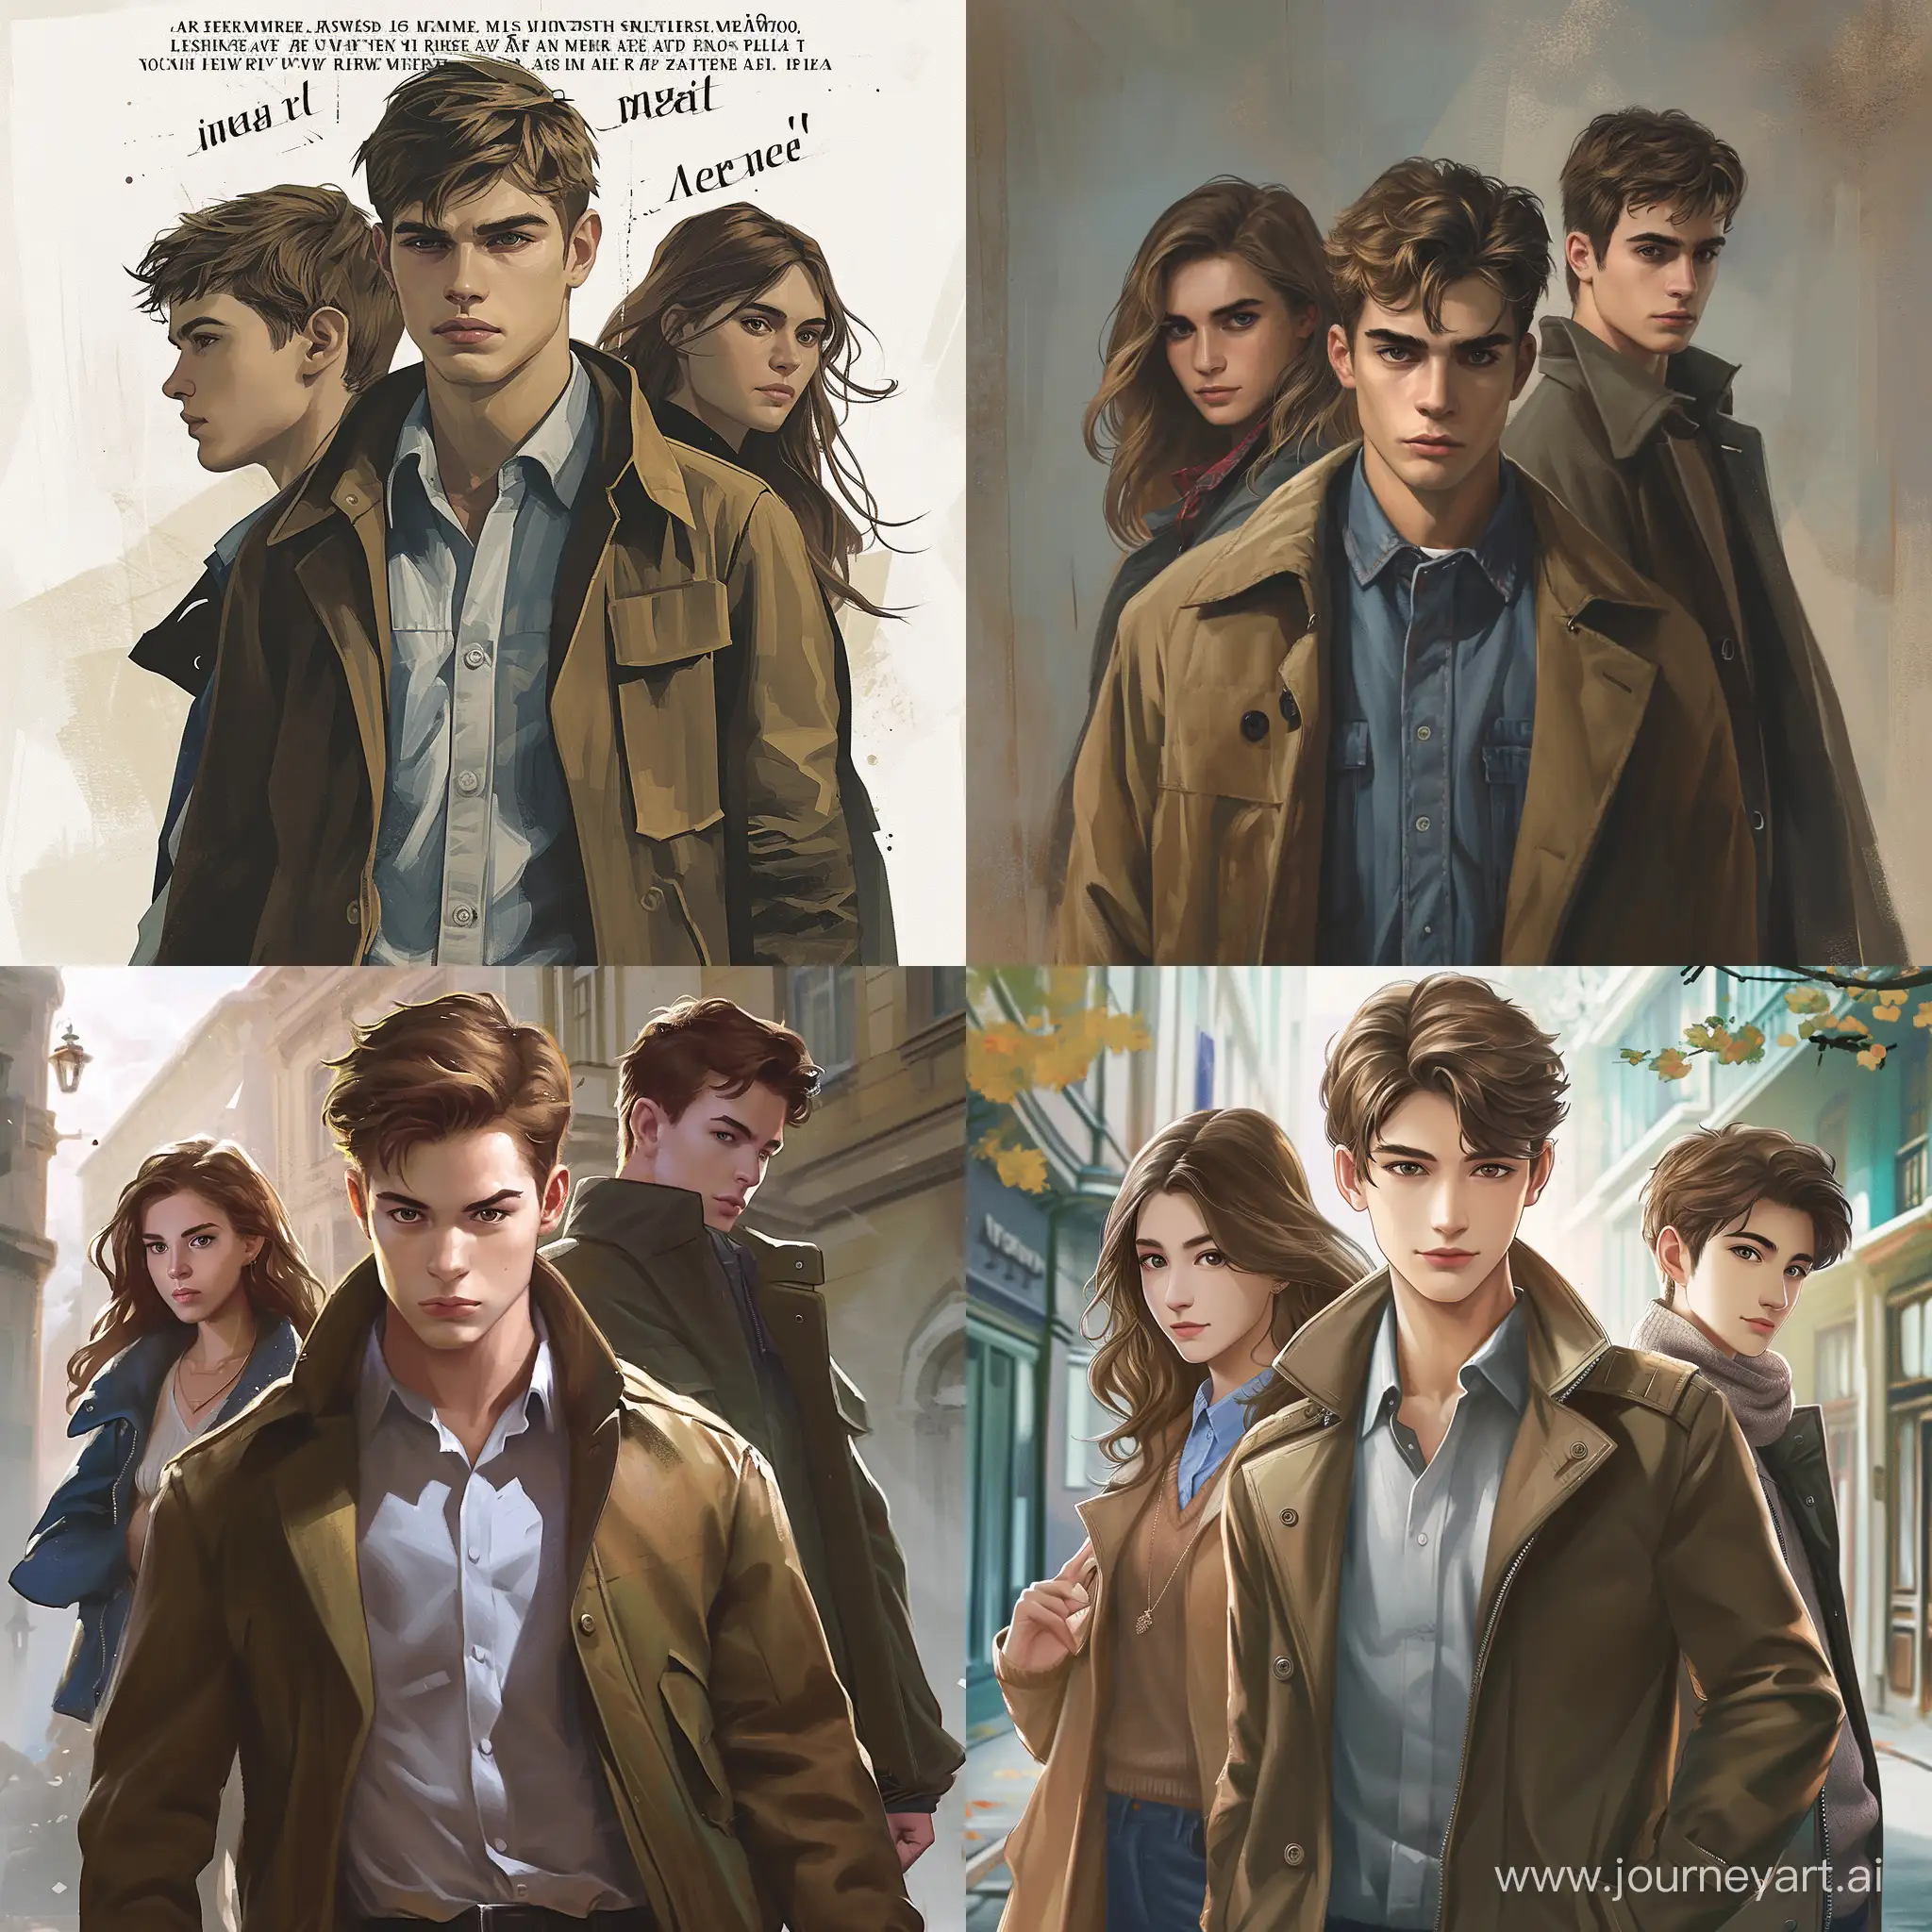 Create a cover for the book. There should be only three main characters in the picture, no inscriptions! In the center is a smart, handsome, serious, but kind teenager, he is 16 years old. Behind his back or next to him is the less intelligent, but very cheerful younger brother of the hero (he is shorter and stouter) and his girlfriend, a beautiful smart sweet girl. The brothers are different, they don't look like each other. The figures and faces of the characters should be as real as possible, as in the photo. The main character's clothing style is a shirt without a tie (or a sweater) and an open coat, while his brother's is typically teenage.